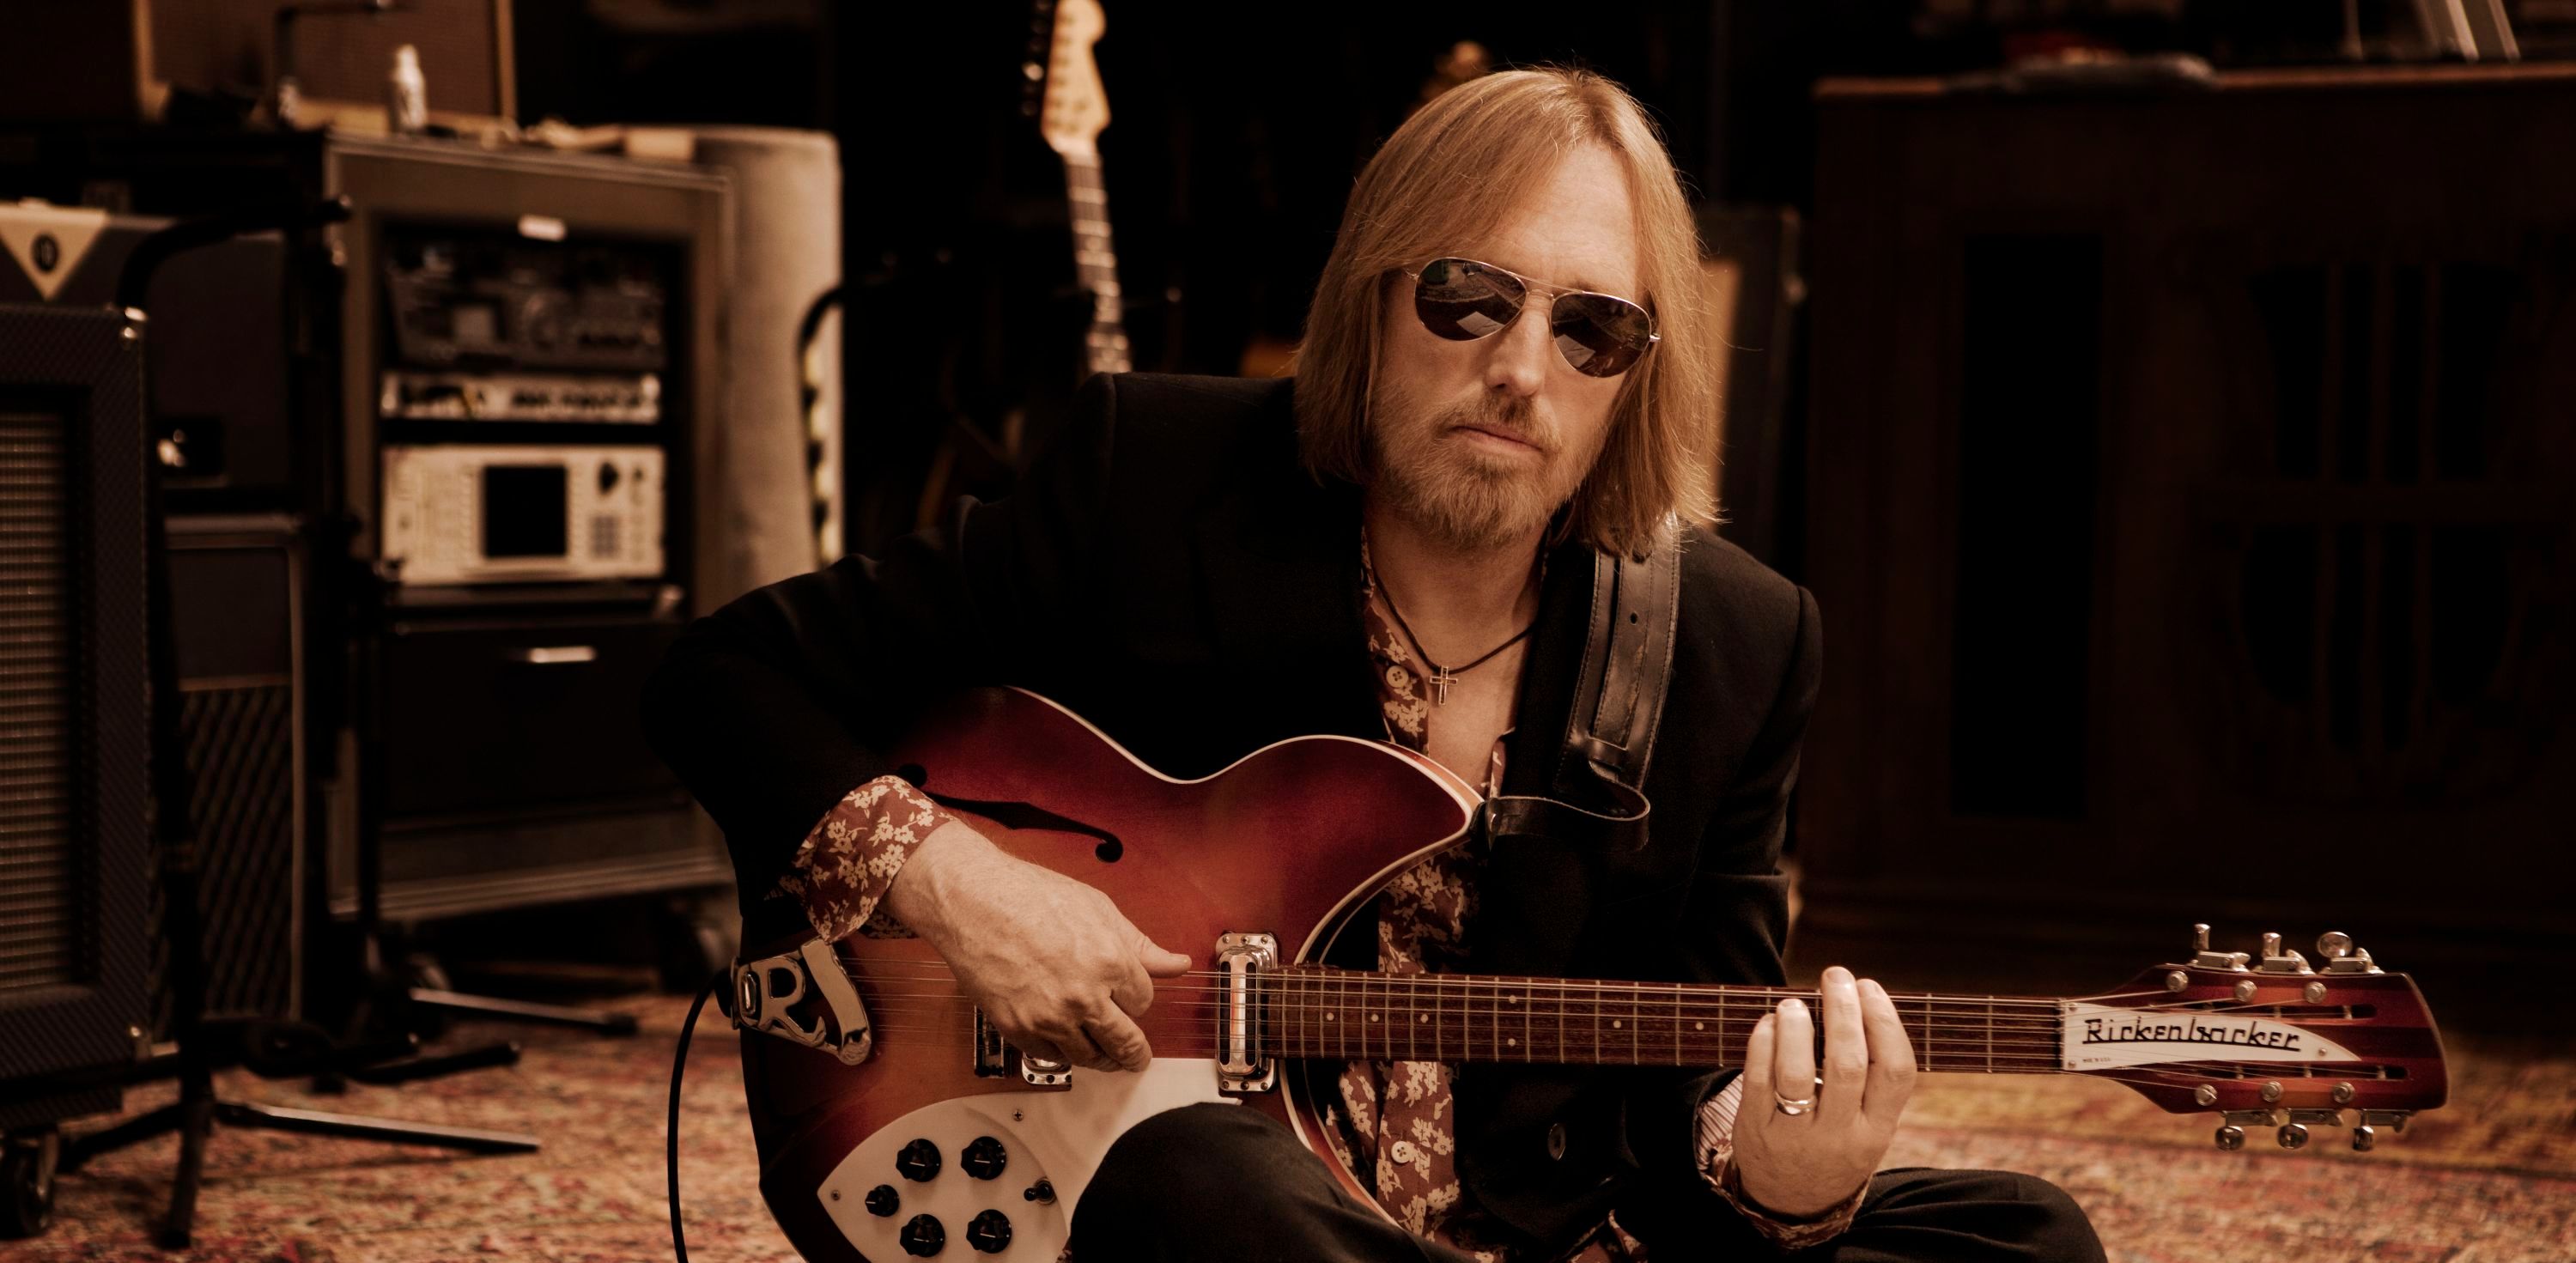 He Was An American Icon: Why Tom Petty Matters